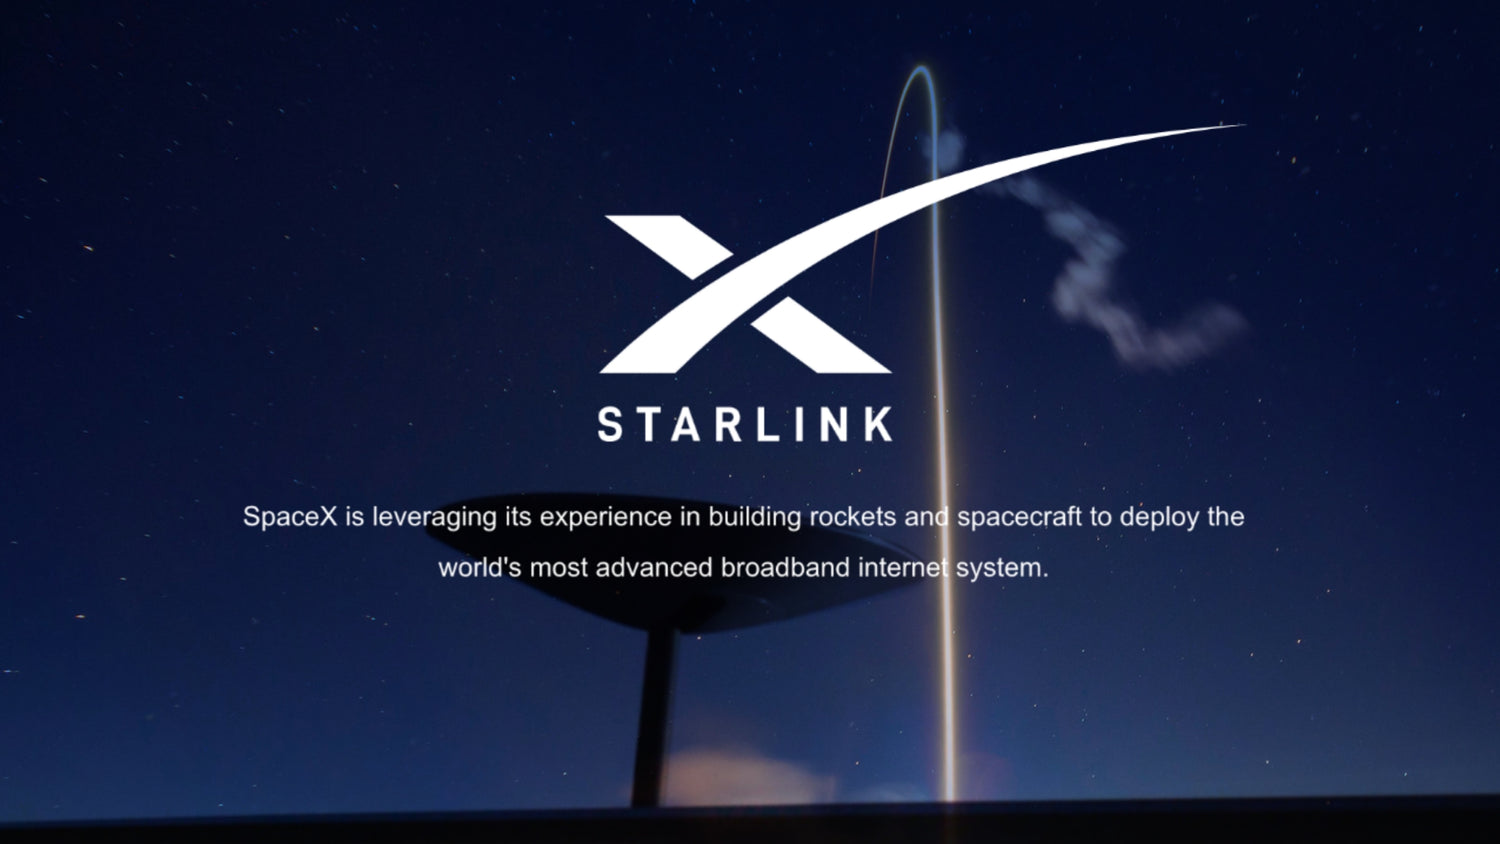 SpaceX Is Now Providing Starlink Internet Service To 90K Users Across 12 Countries